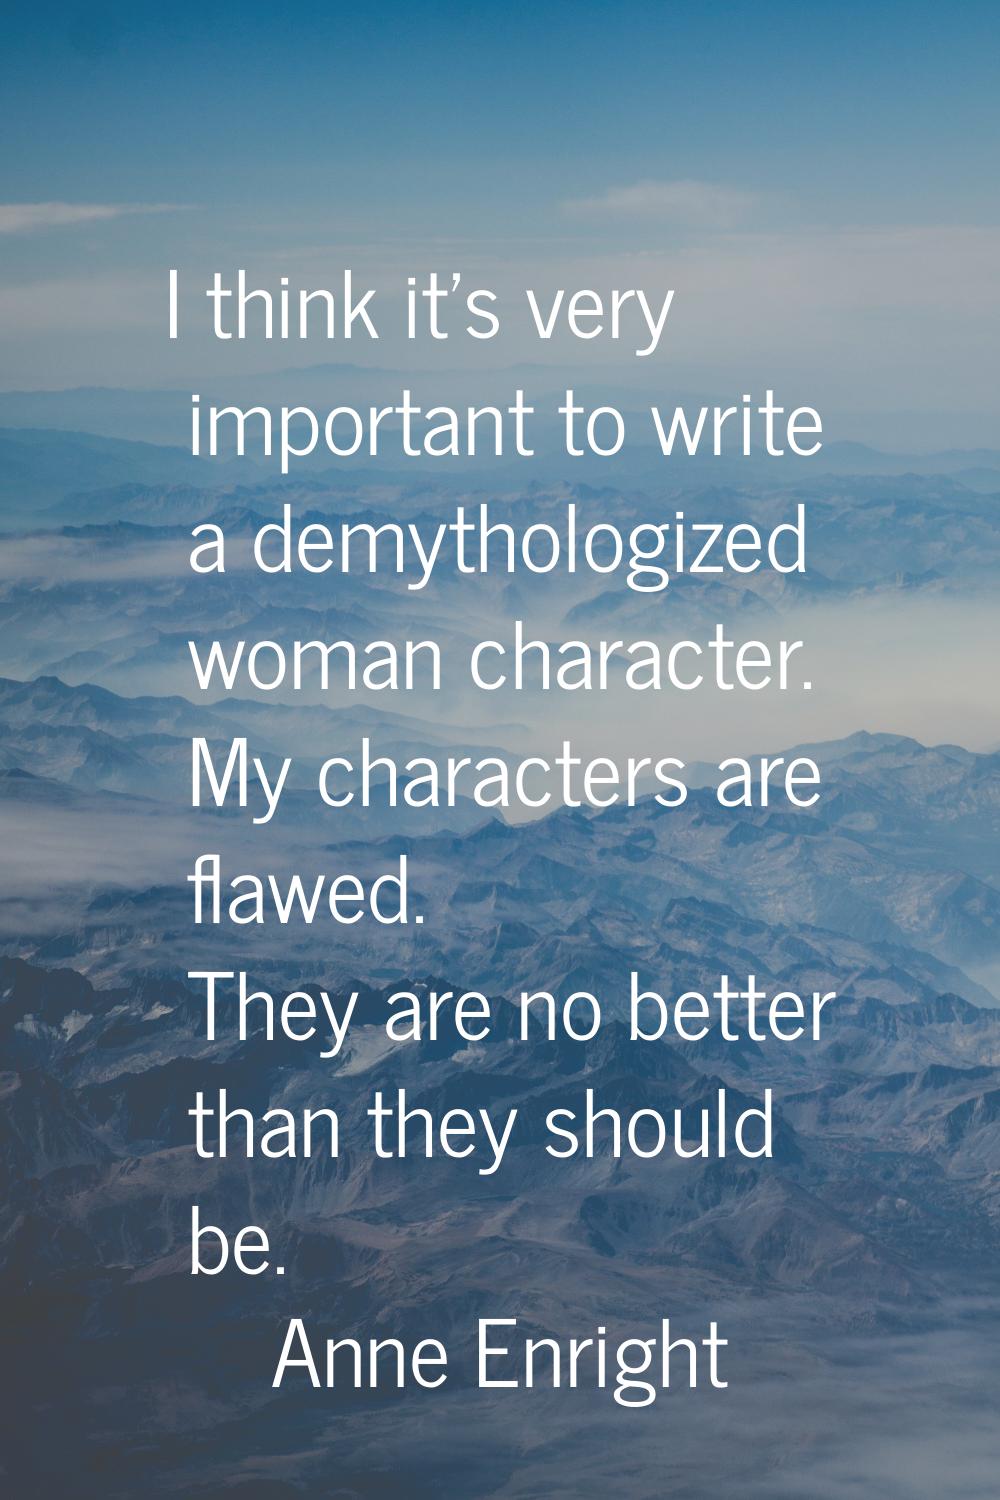 I think it's very important to write a demythologized woman character. My characters are flawed. Th